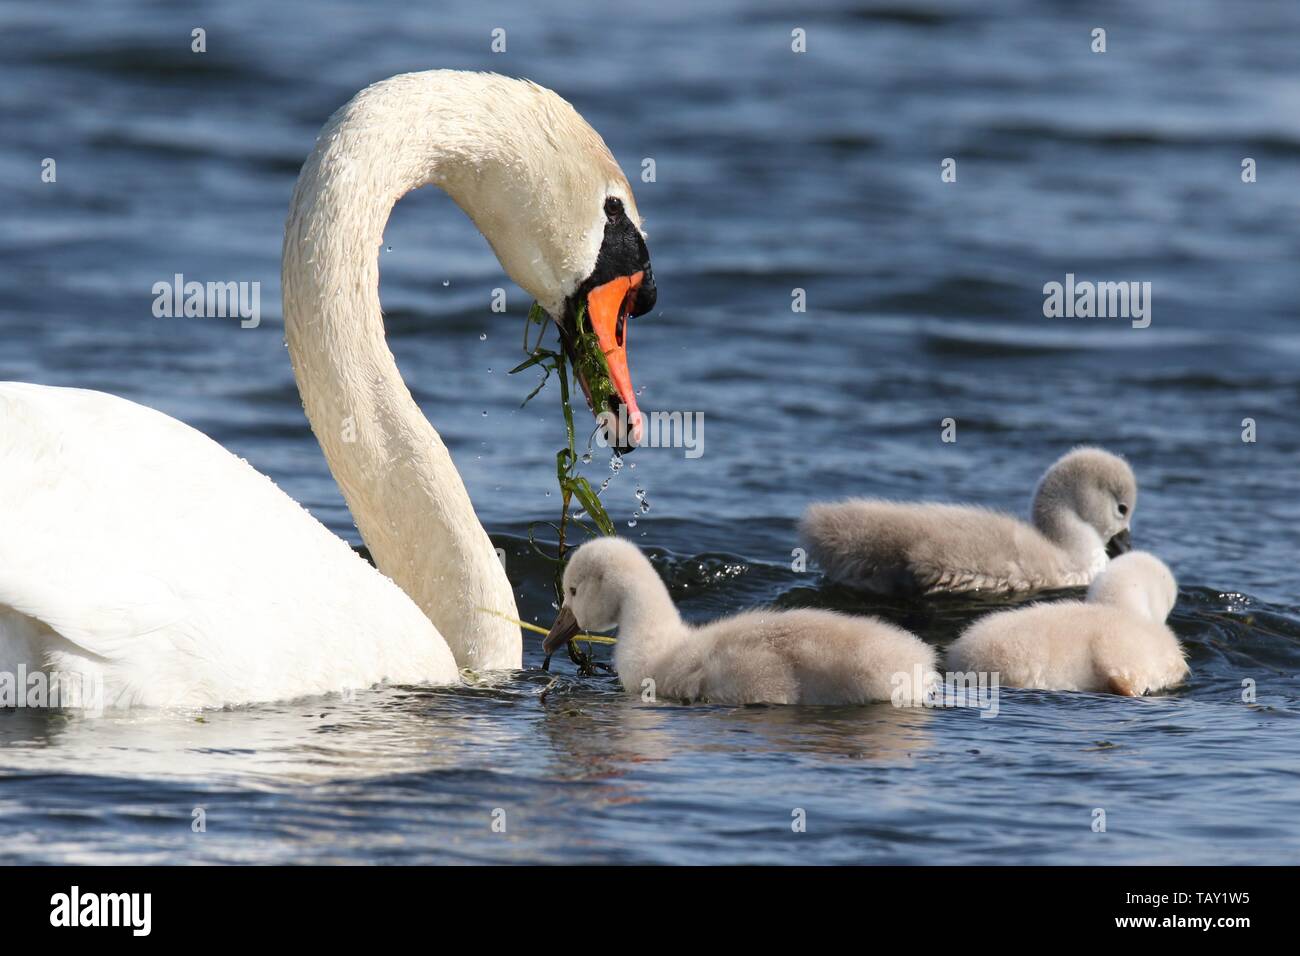 A mute swan Cygnus olor with cygnets swimming on a blue lake in Spring the parent swan is feeding the cygnets Stock Photo